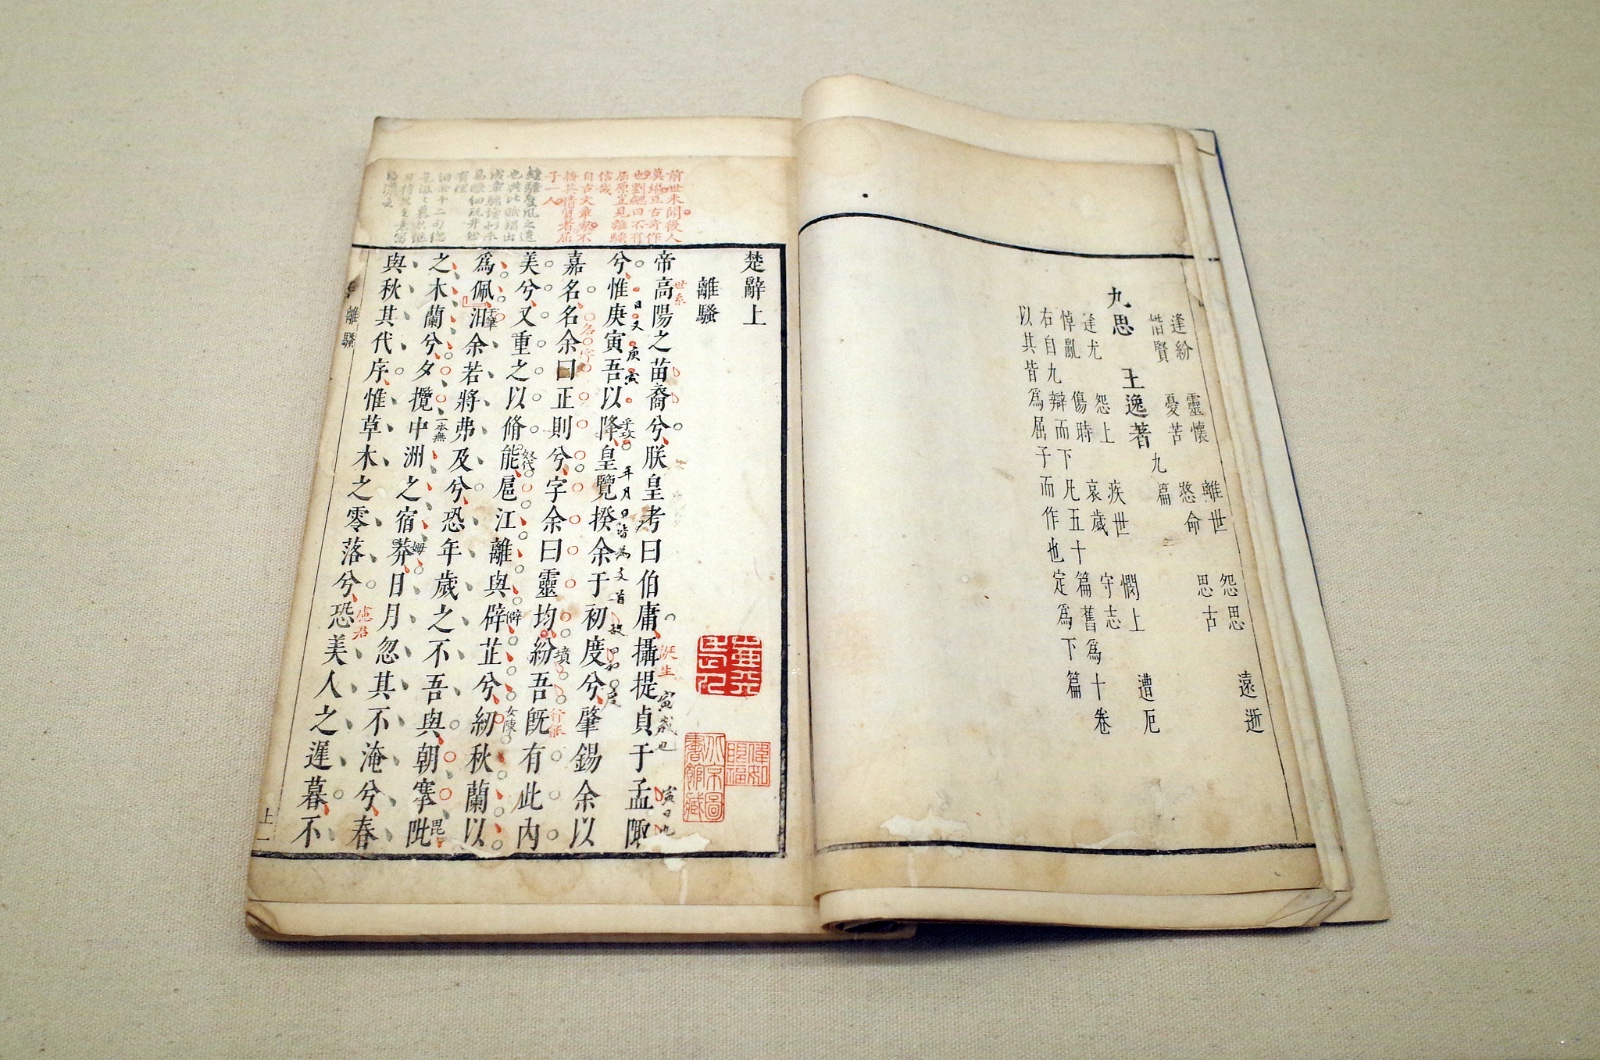 A file photo shows the book 